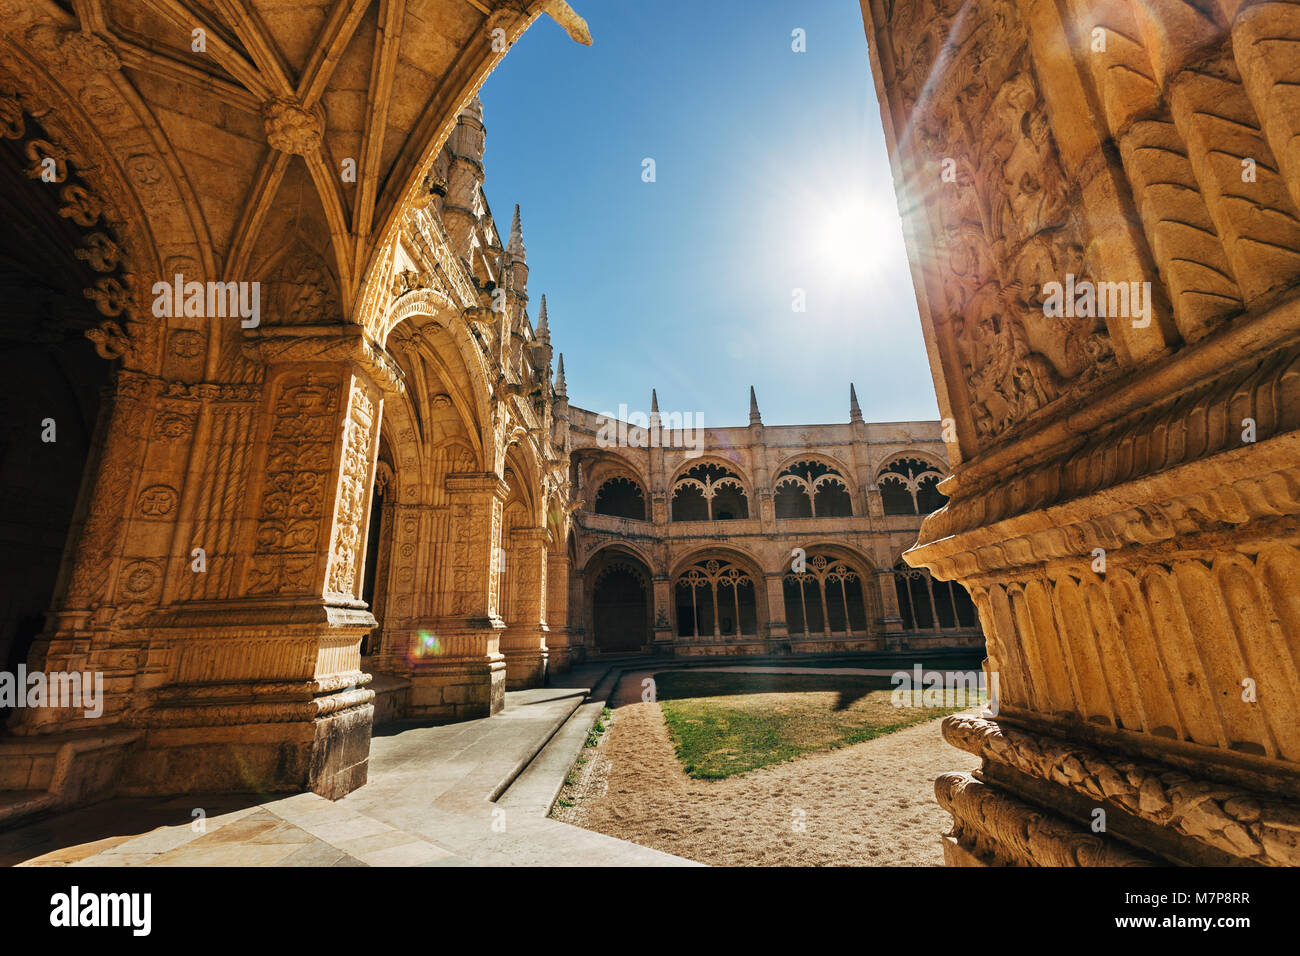 Architecture of Jeronimos Monastery in Lisbon, Portugal. Manueline style architecture. Stock Photo